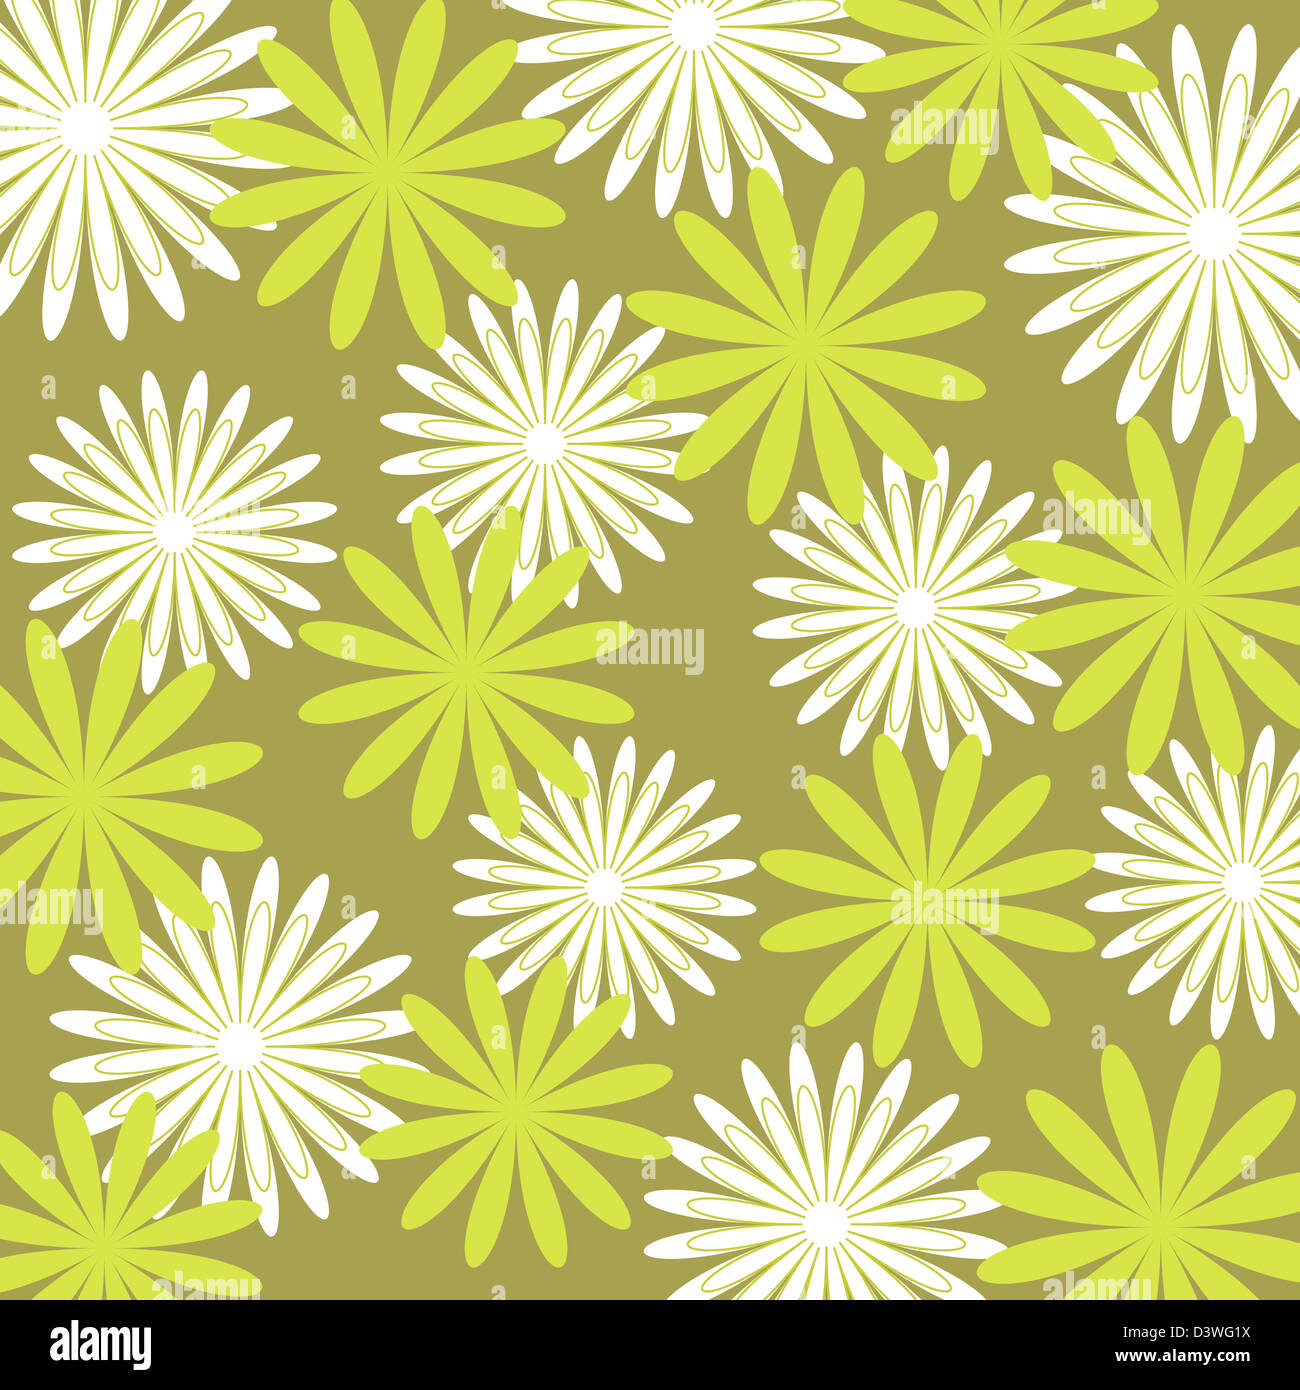 Colorful seamless floral pattern Stock Photo